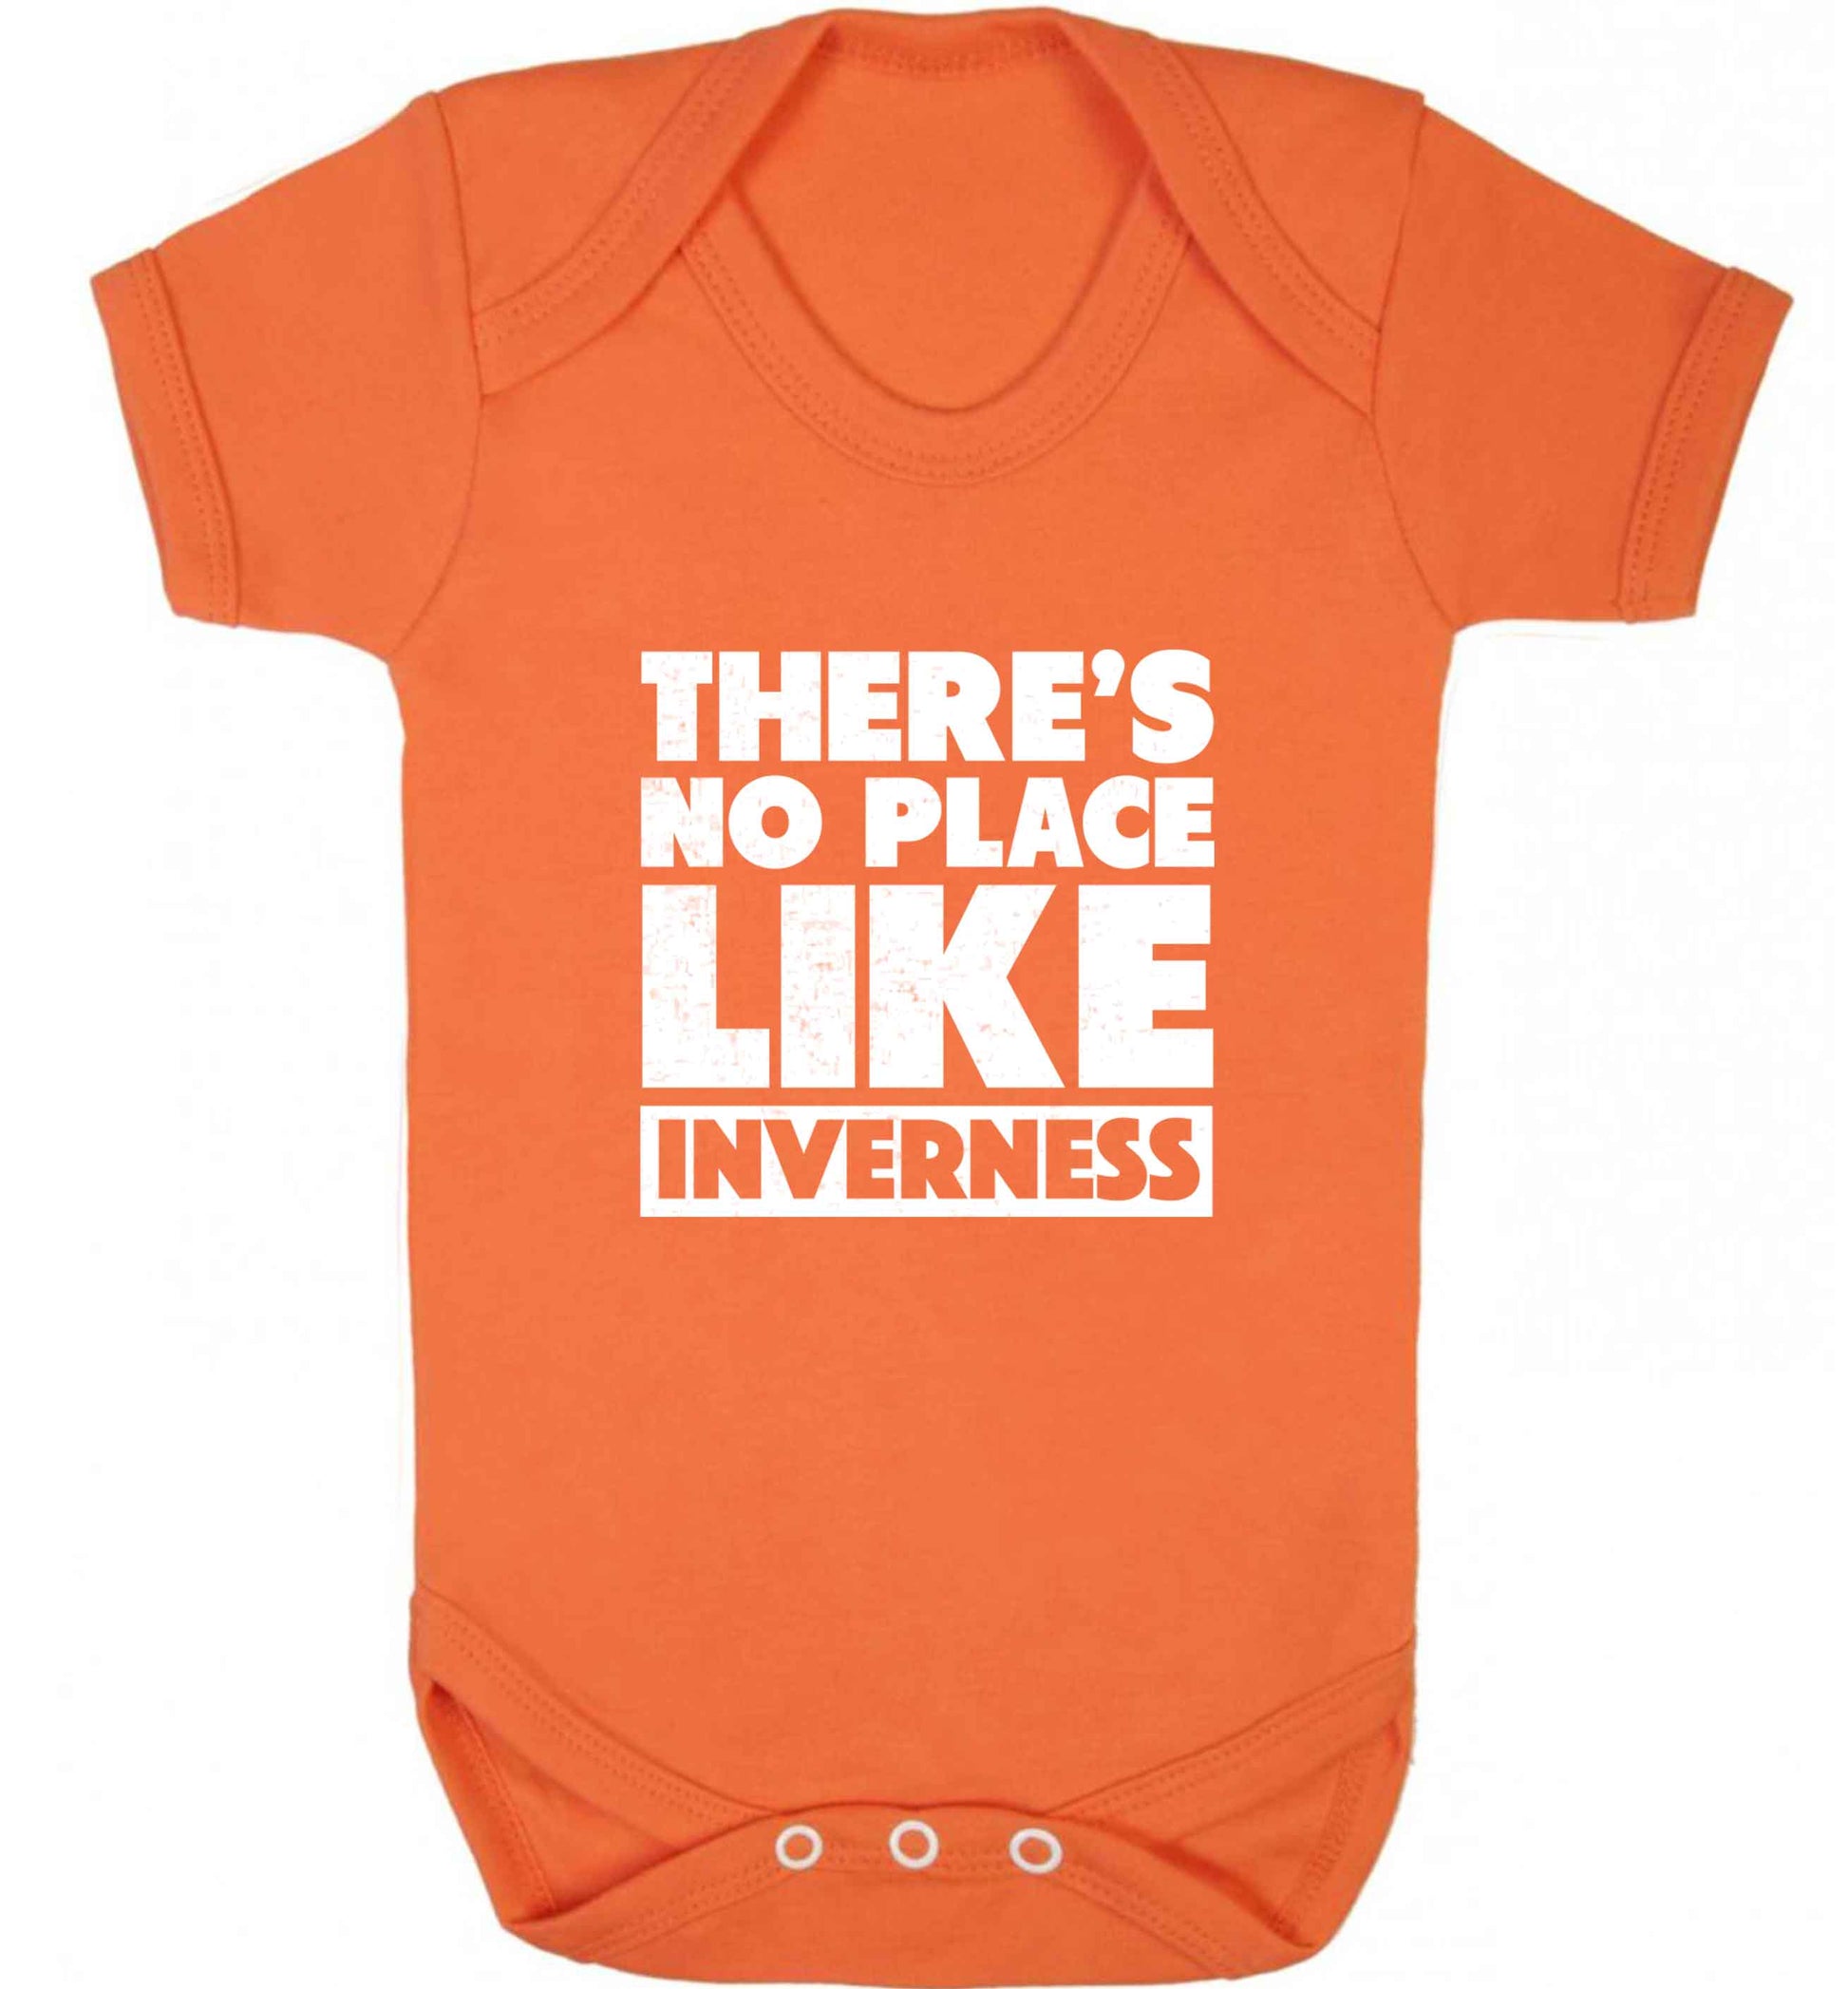 There's no place like Inverness baby vest orange 18-24 months